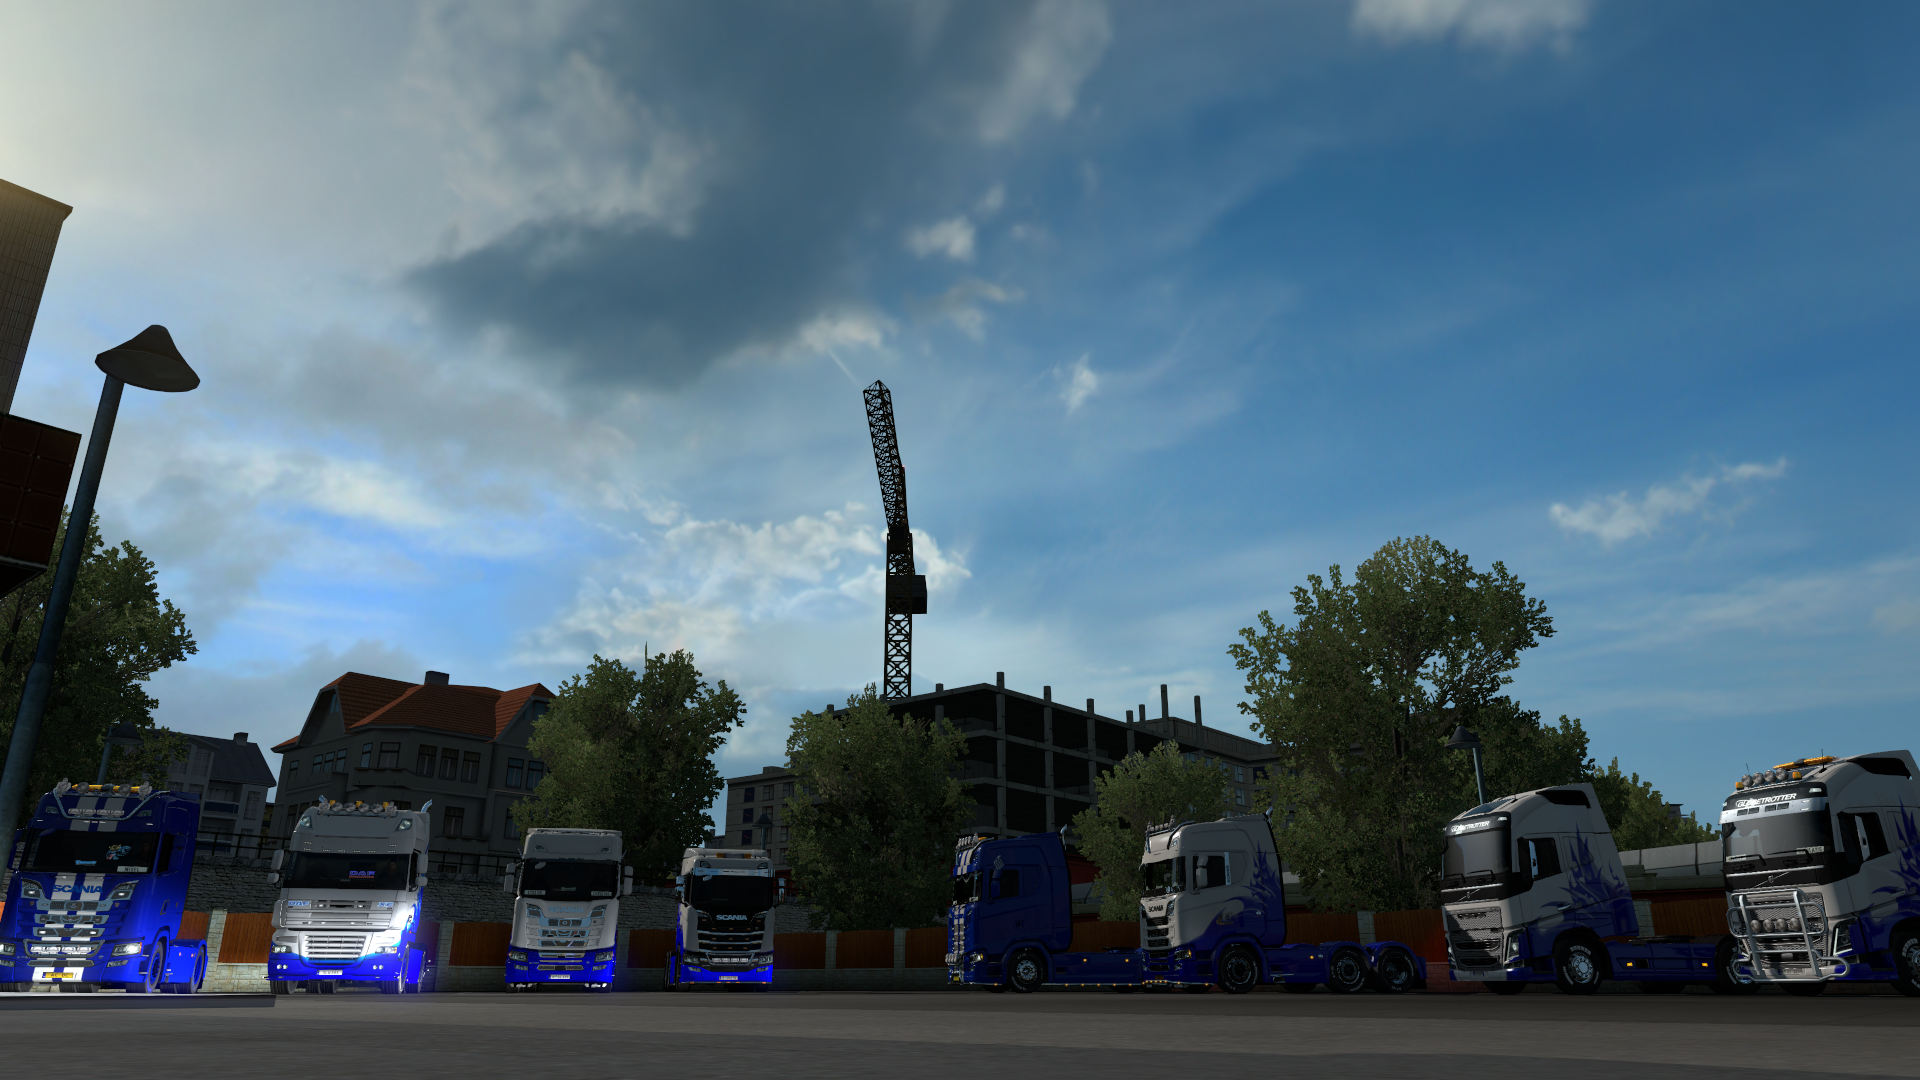 ets2_20200221_232010_00.png